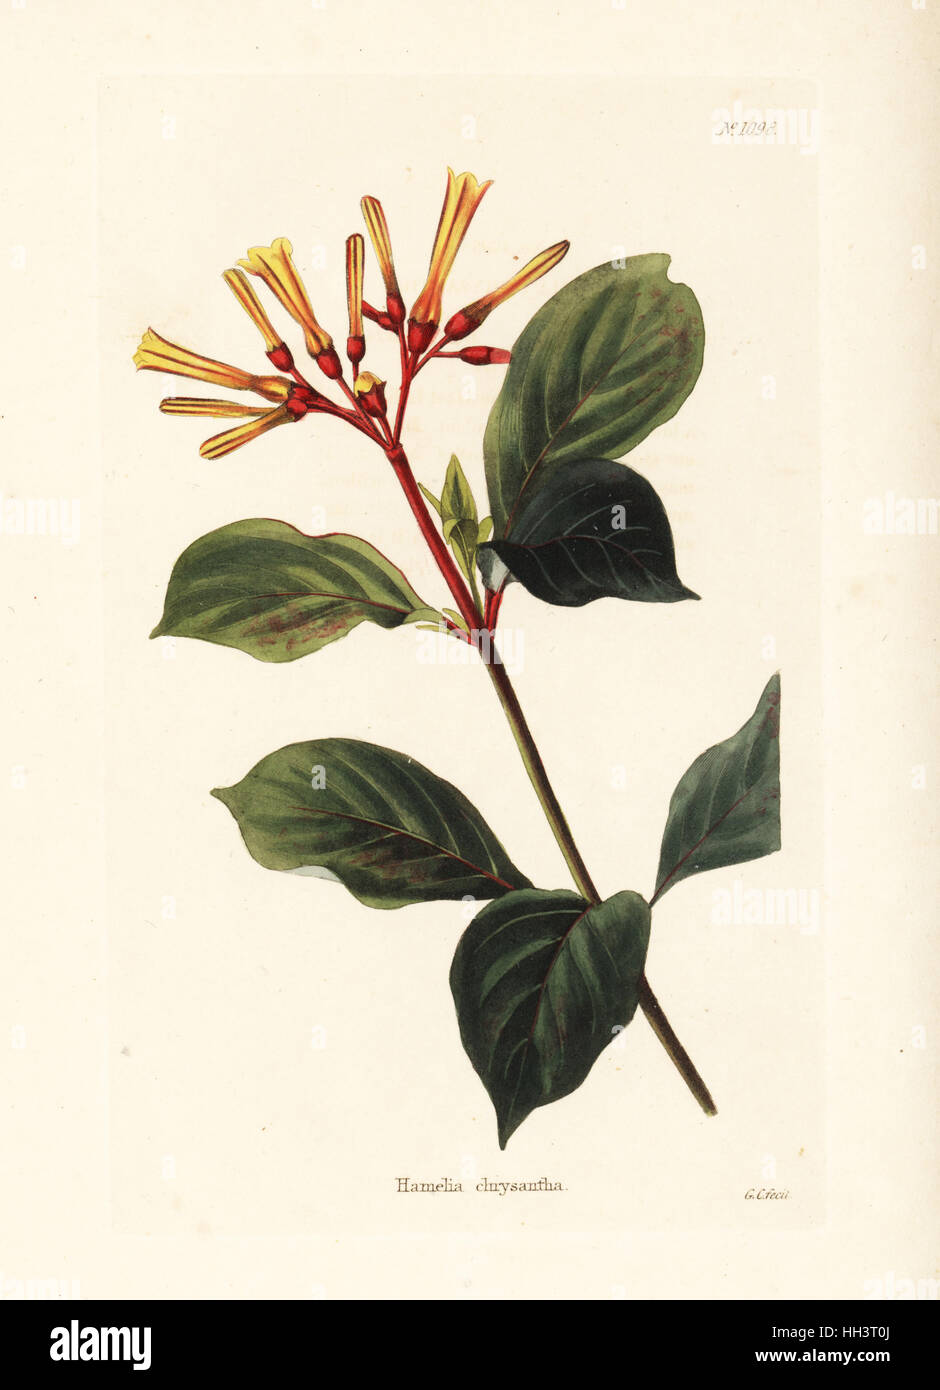 Hamelia chrysantha. West Indies. Handcoloured copperplate engraving by George Cooke from Conrad Loddiges' Botanical Cabinet, Hackney, 1825. Stock Photo